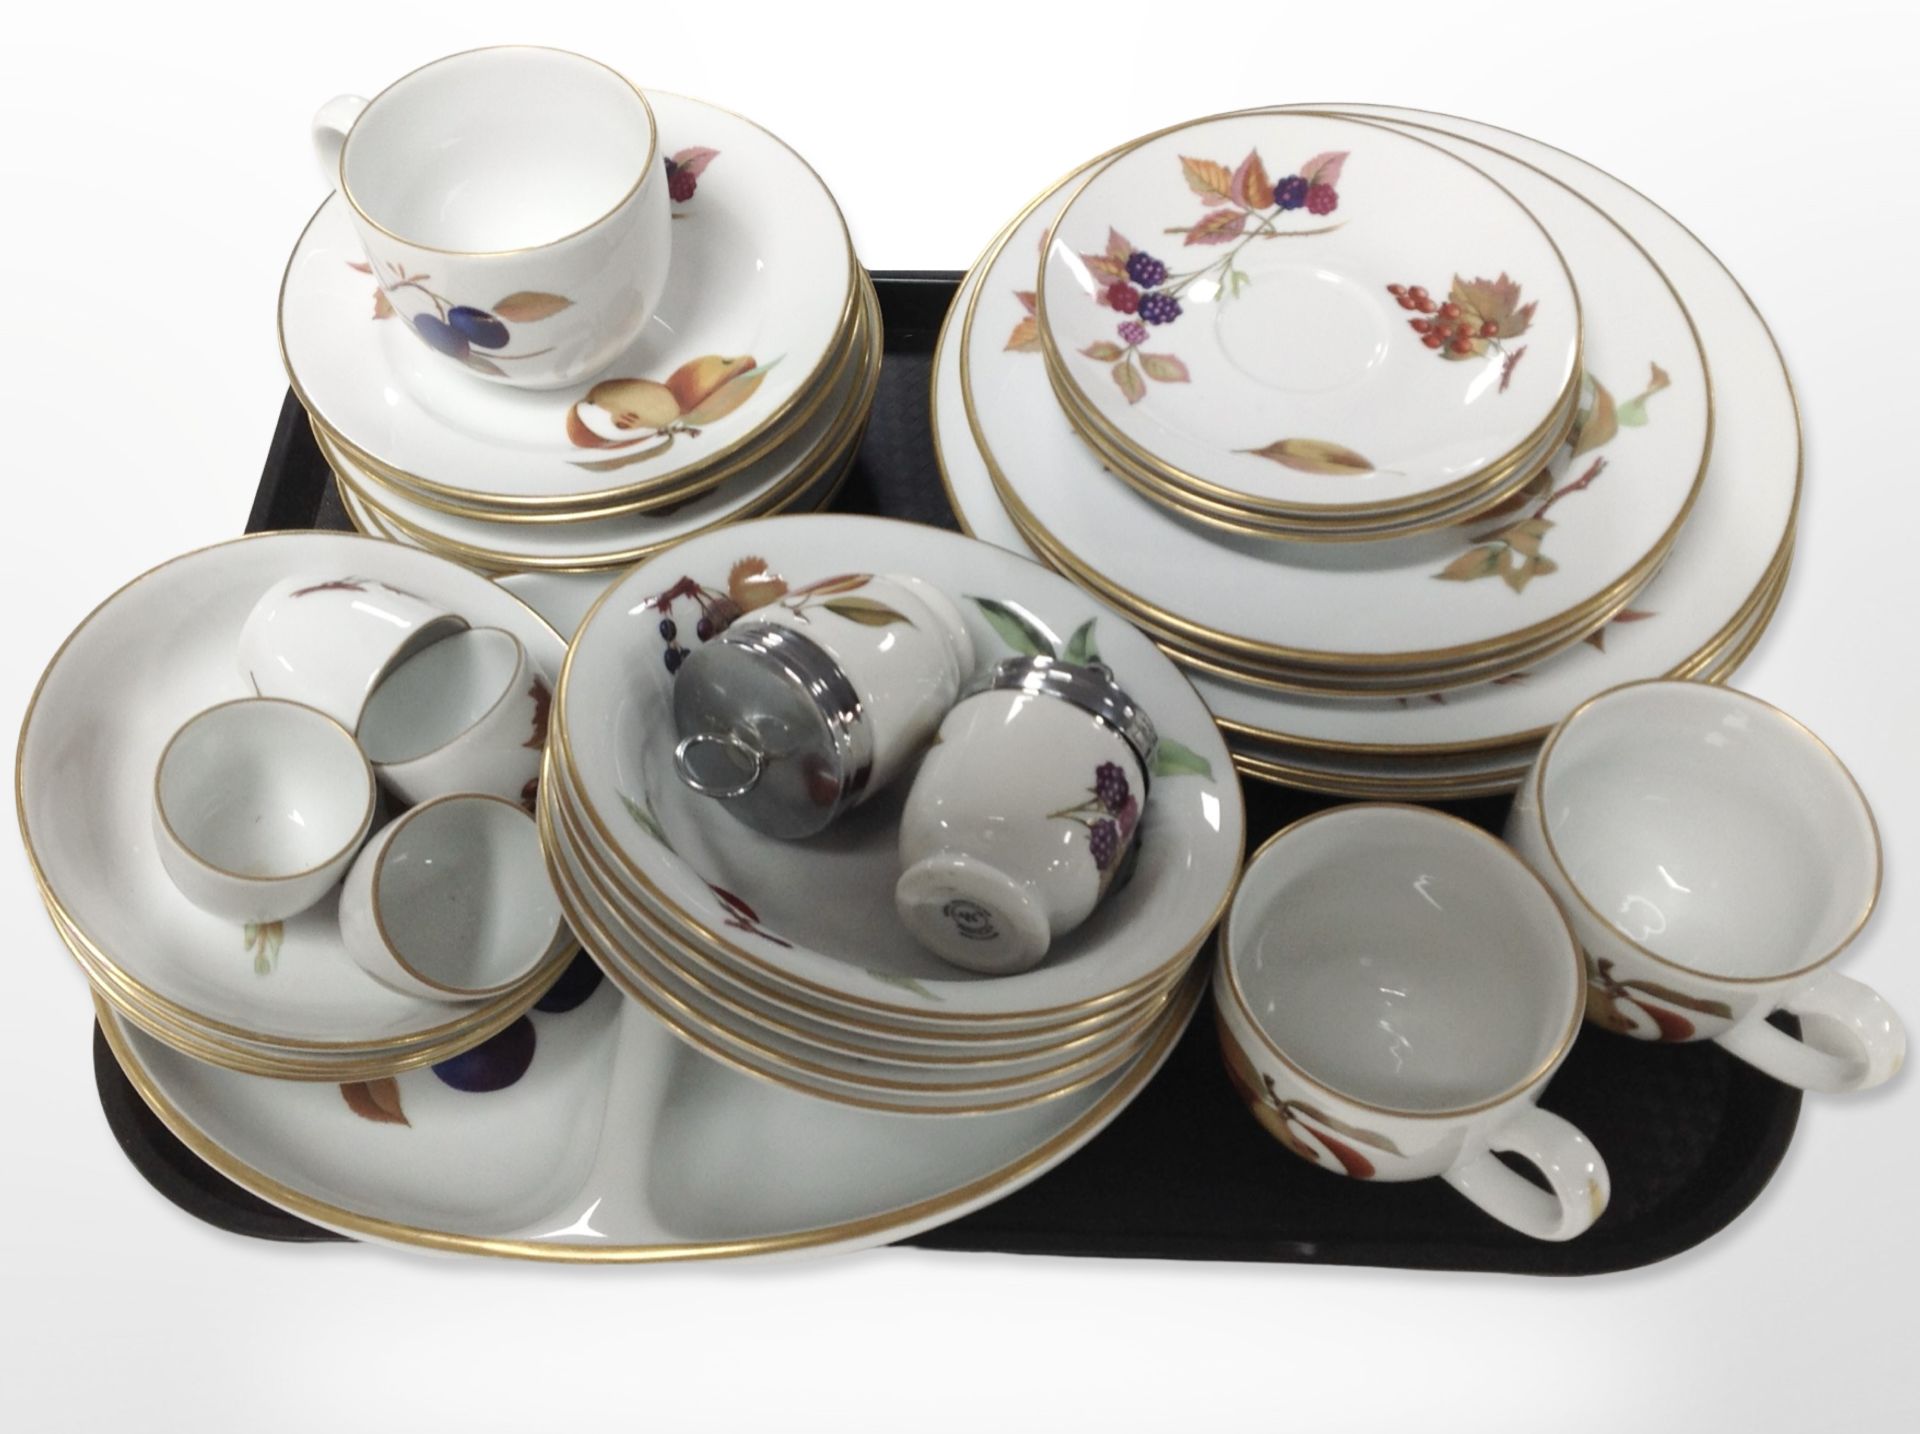 38 pieces of Royal Worcester Evesham tea and dinner china.